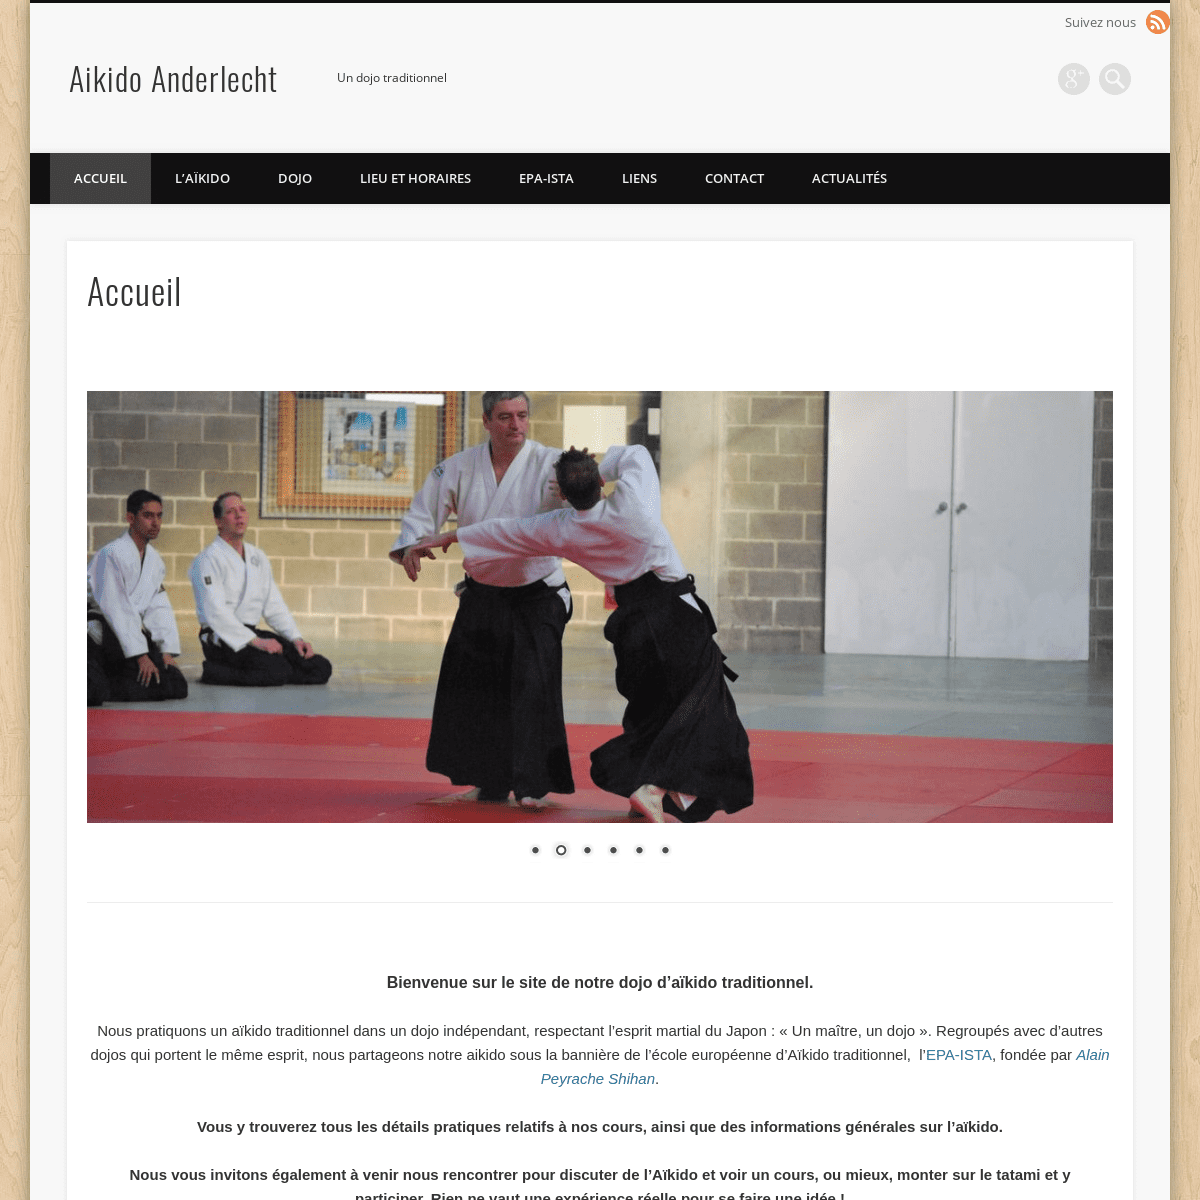 A complete backup of aikido-anderlecht.be